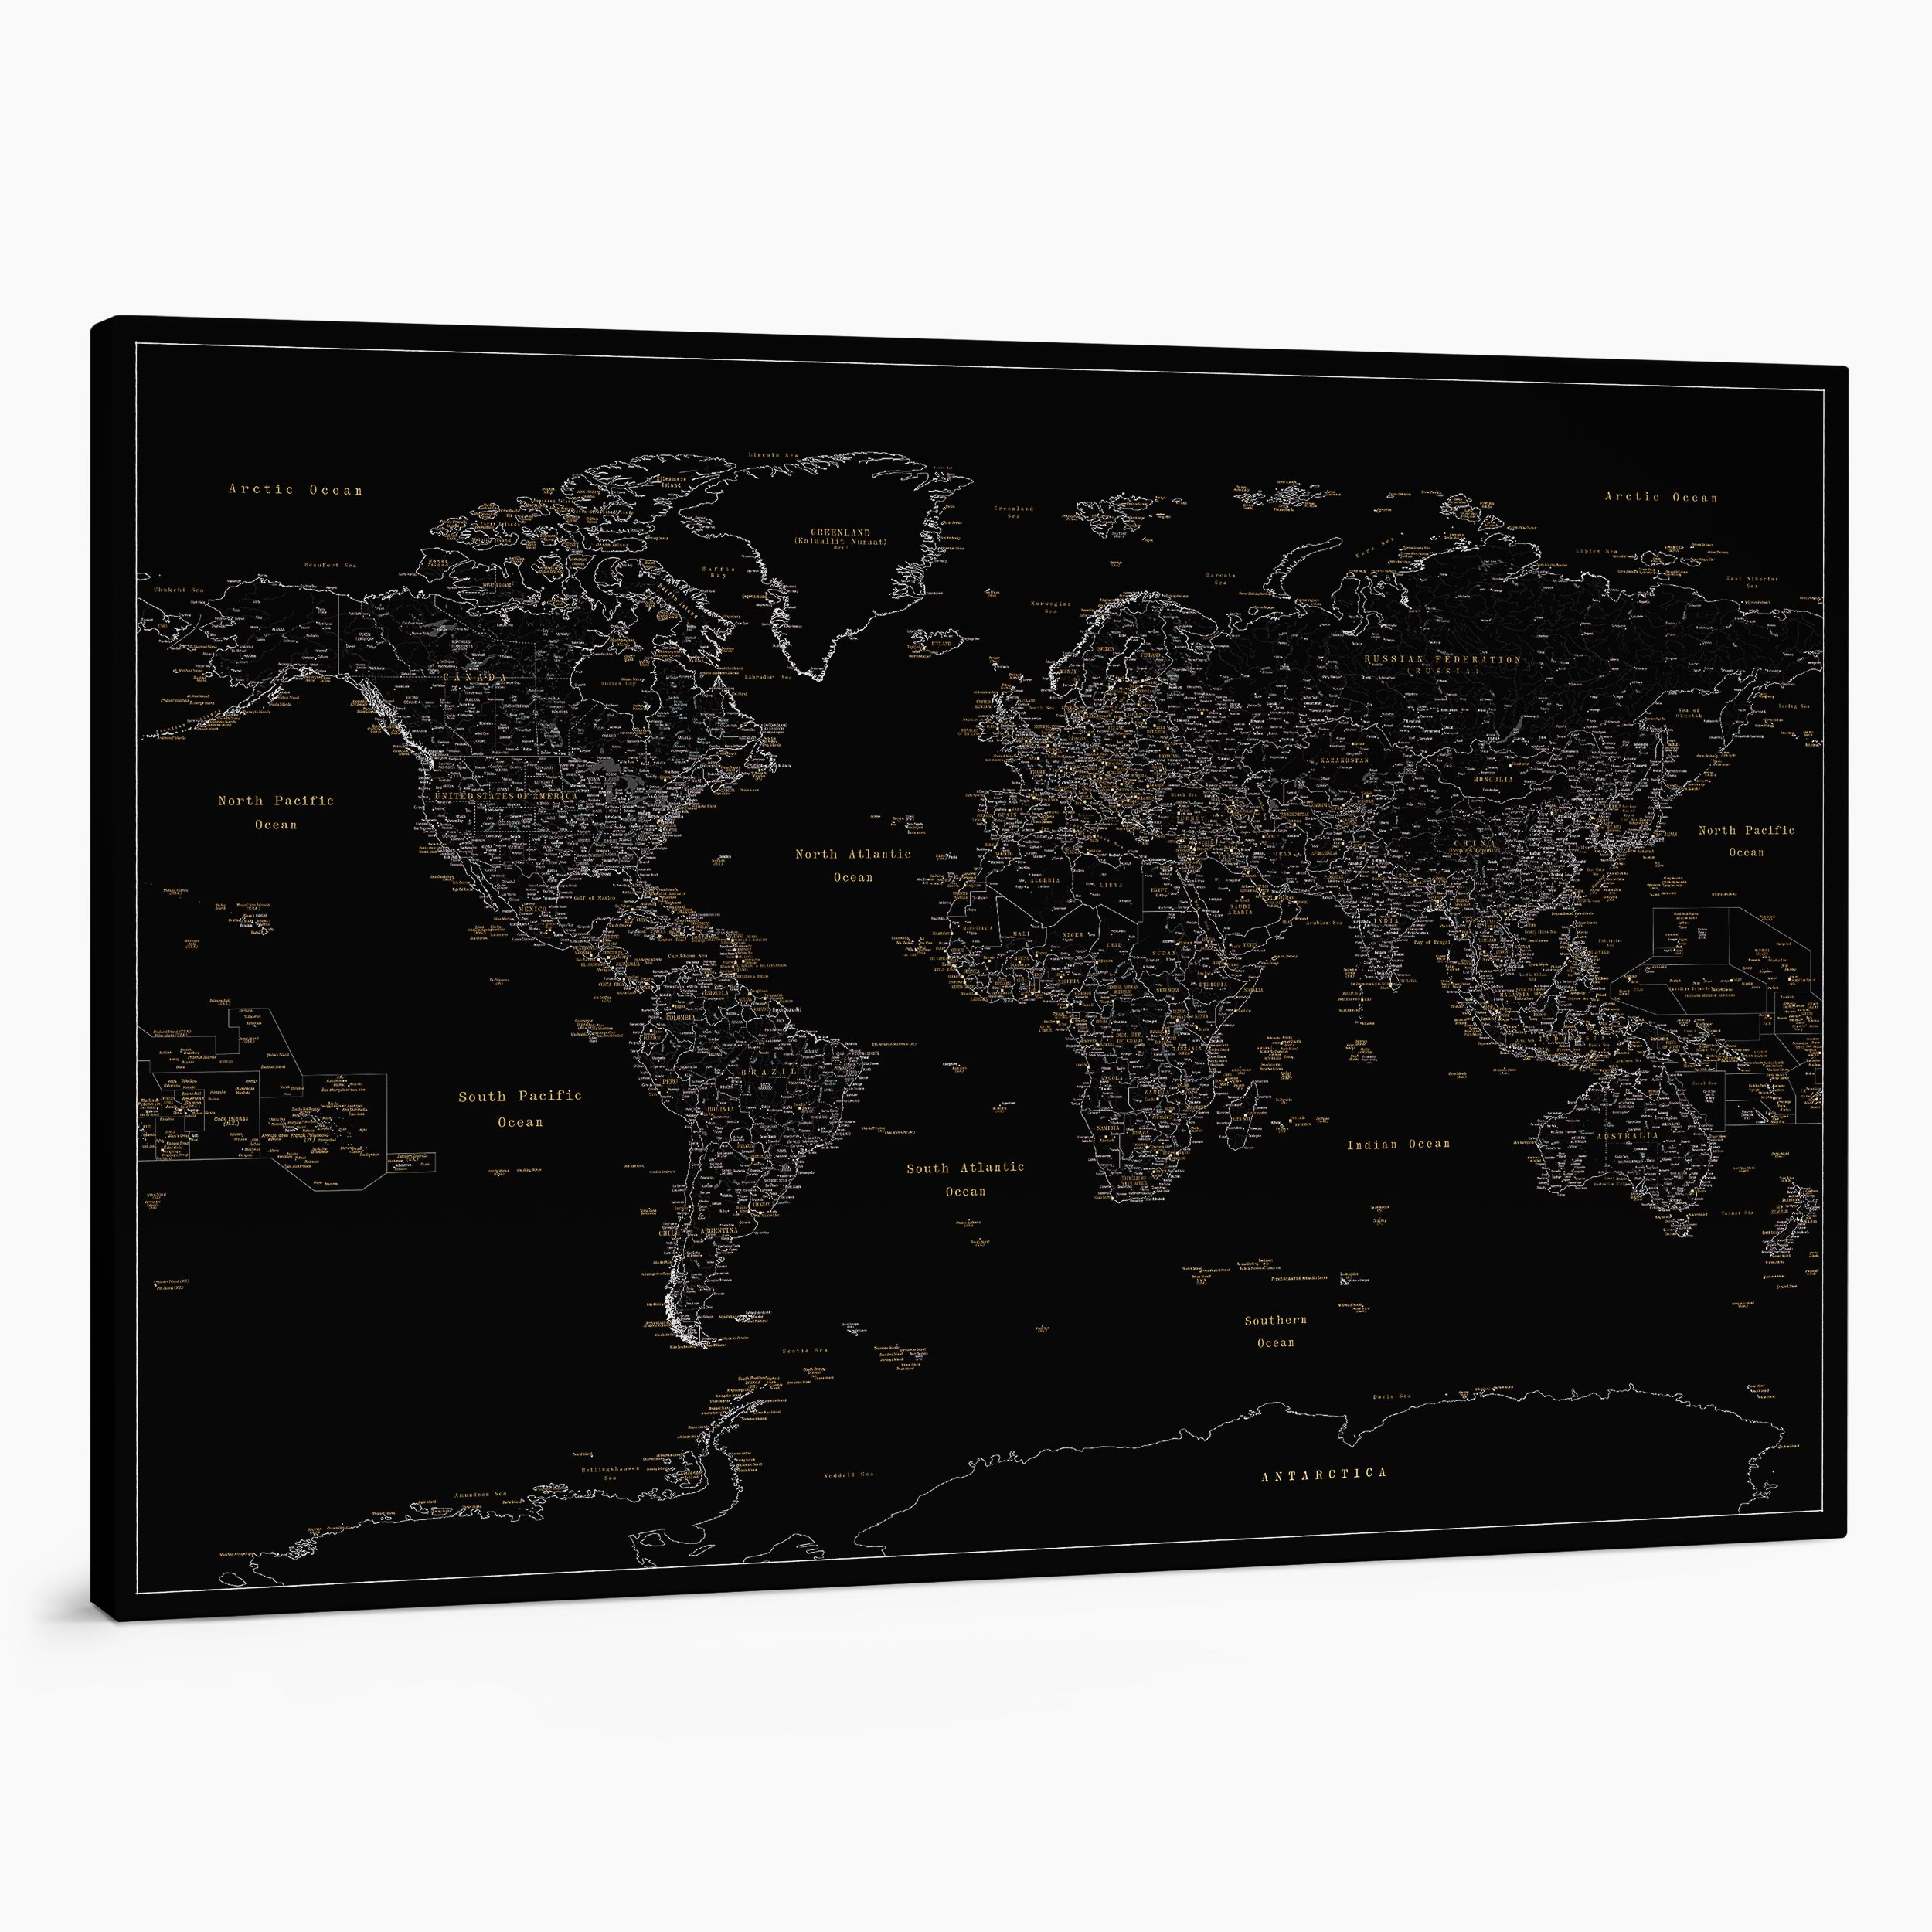 28P large push pin world map to track places visited on canvas midnight black